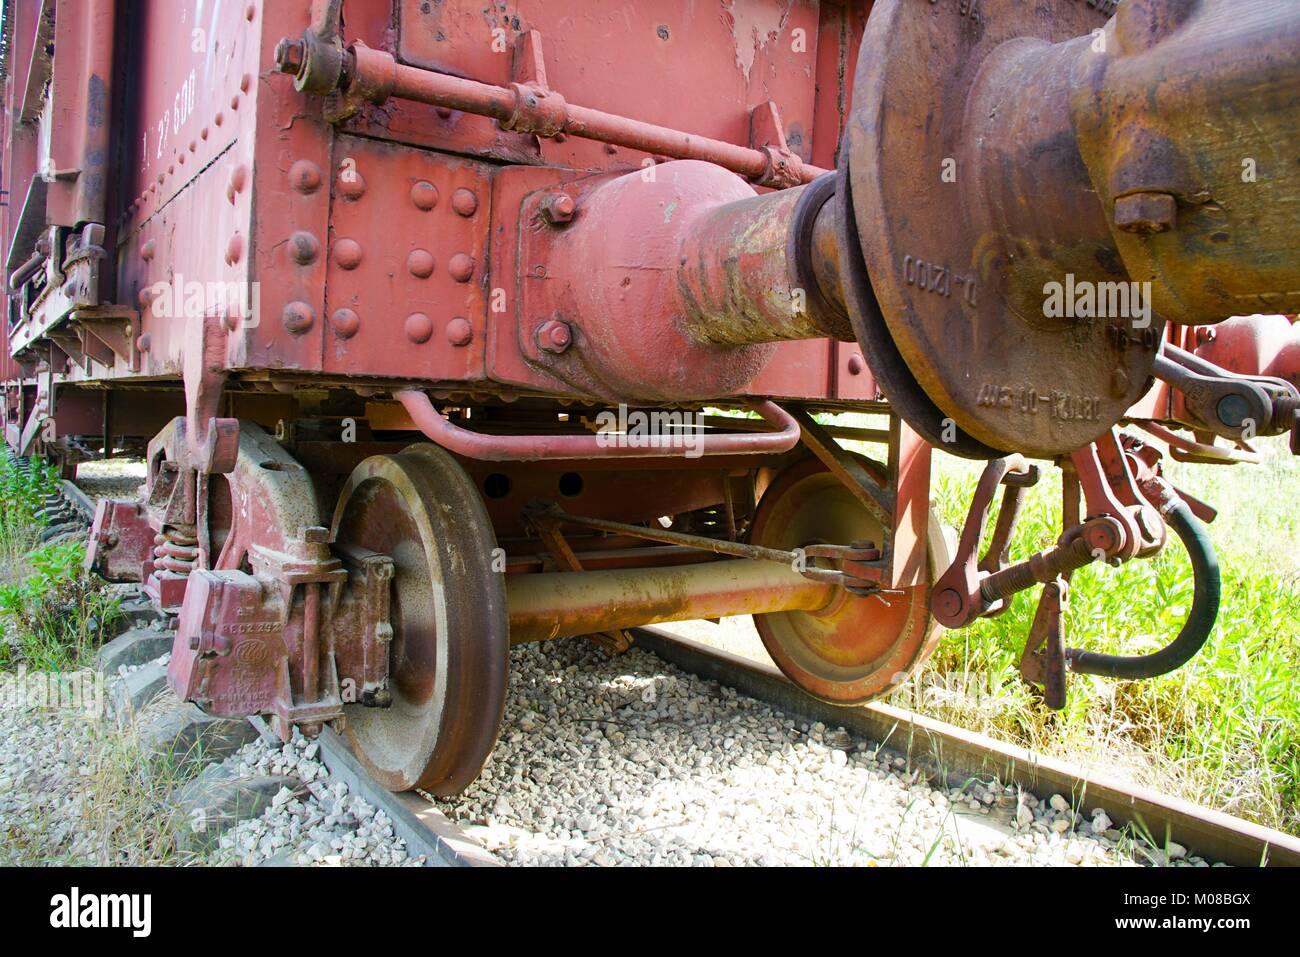 Abandoned train carriage in a disused railway yard. Stock Photo